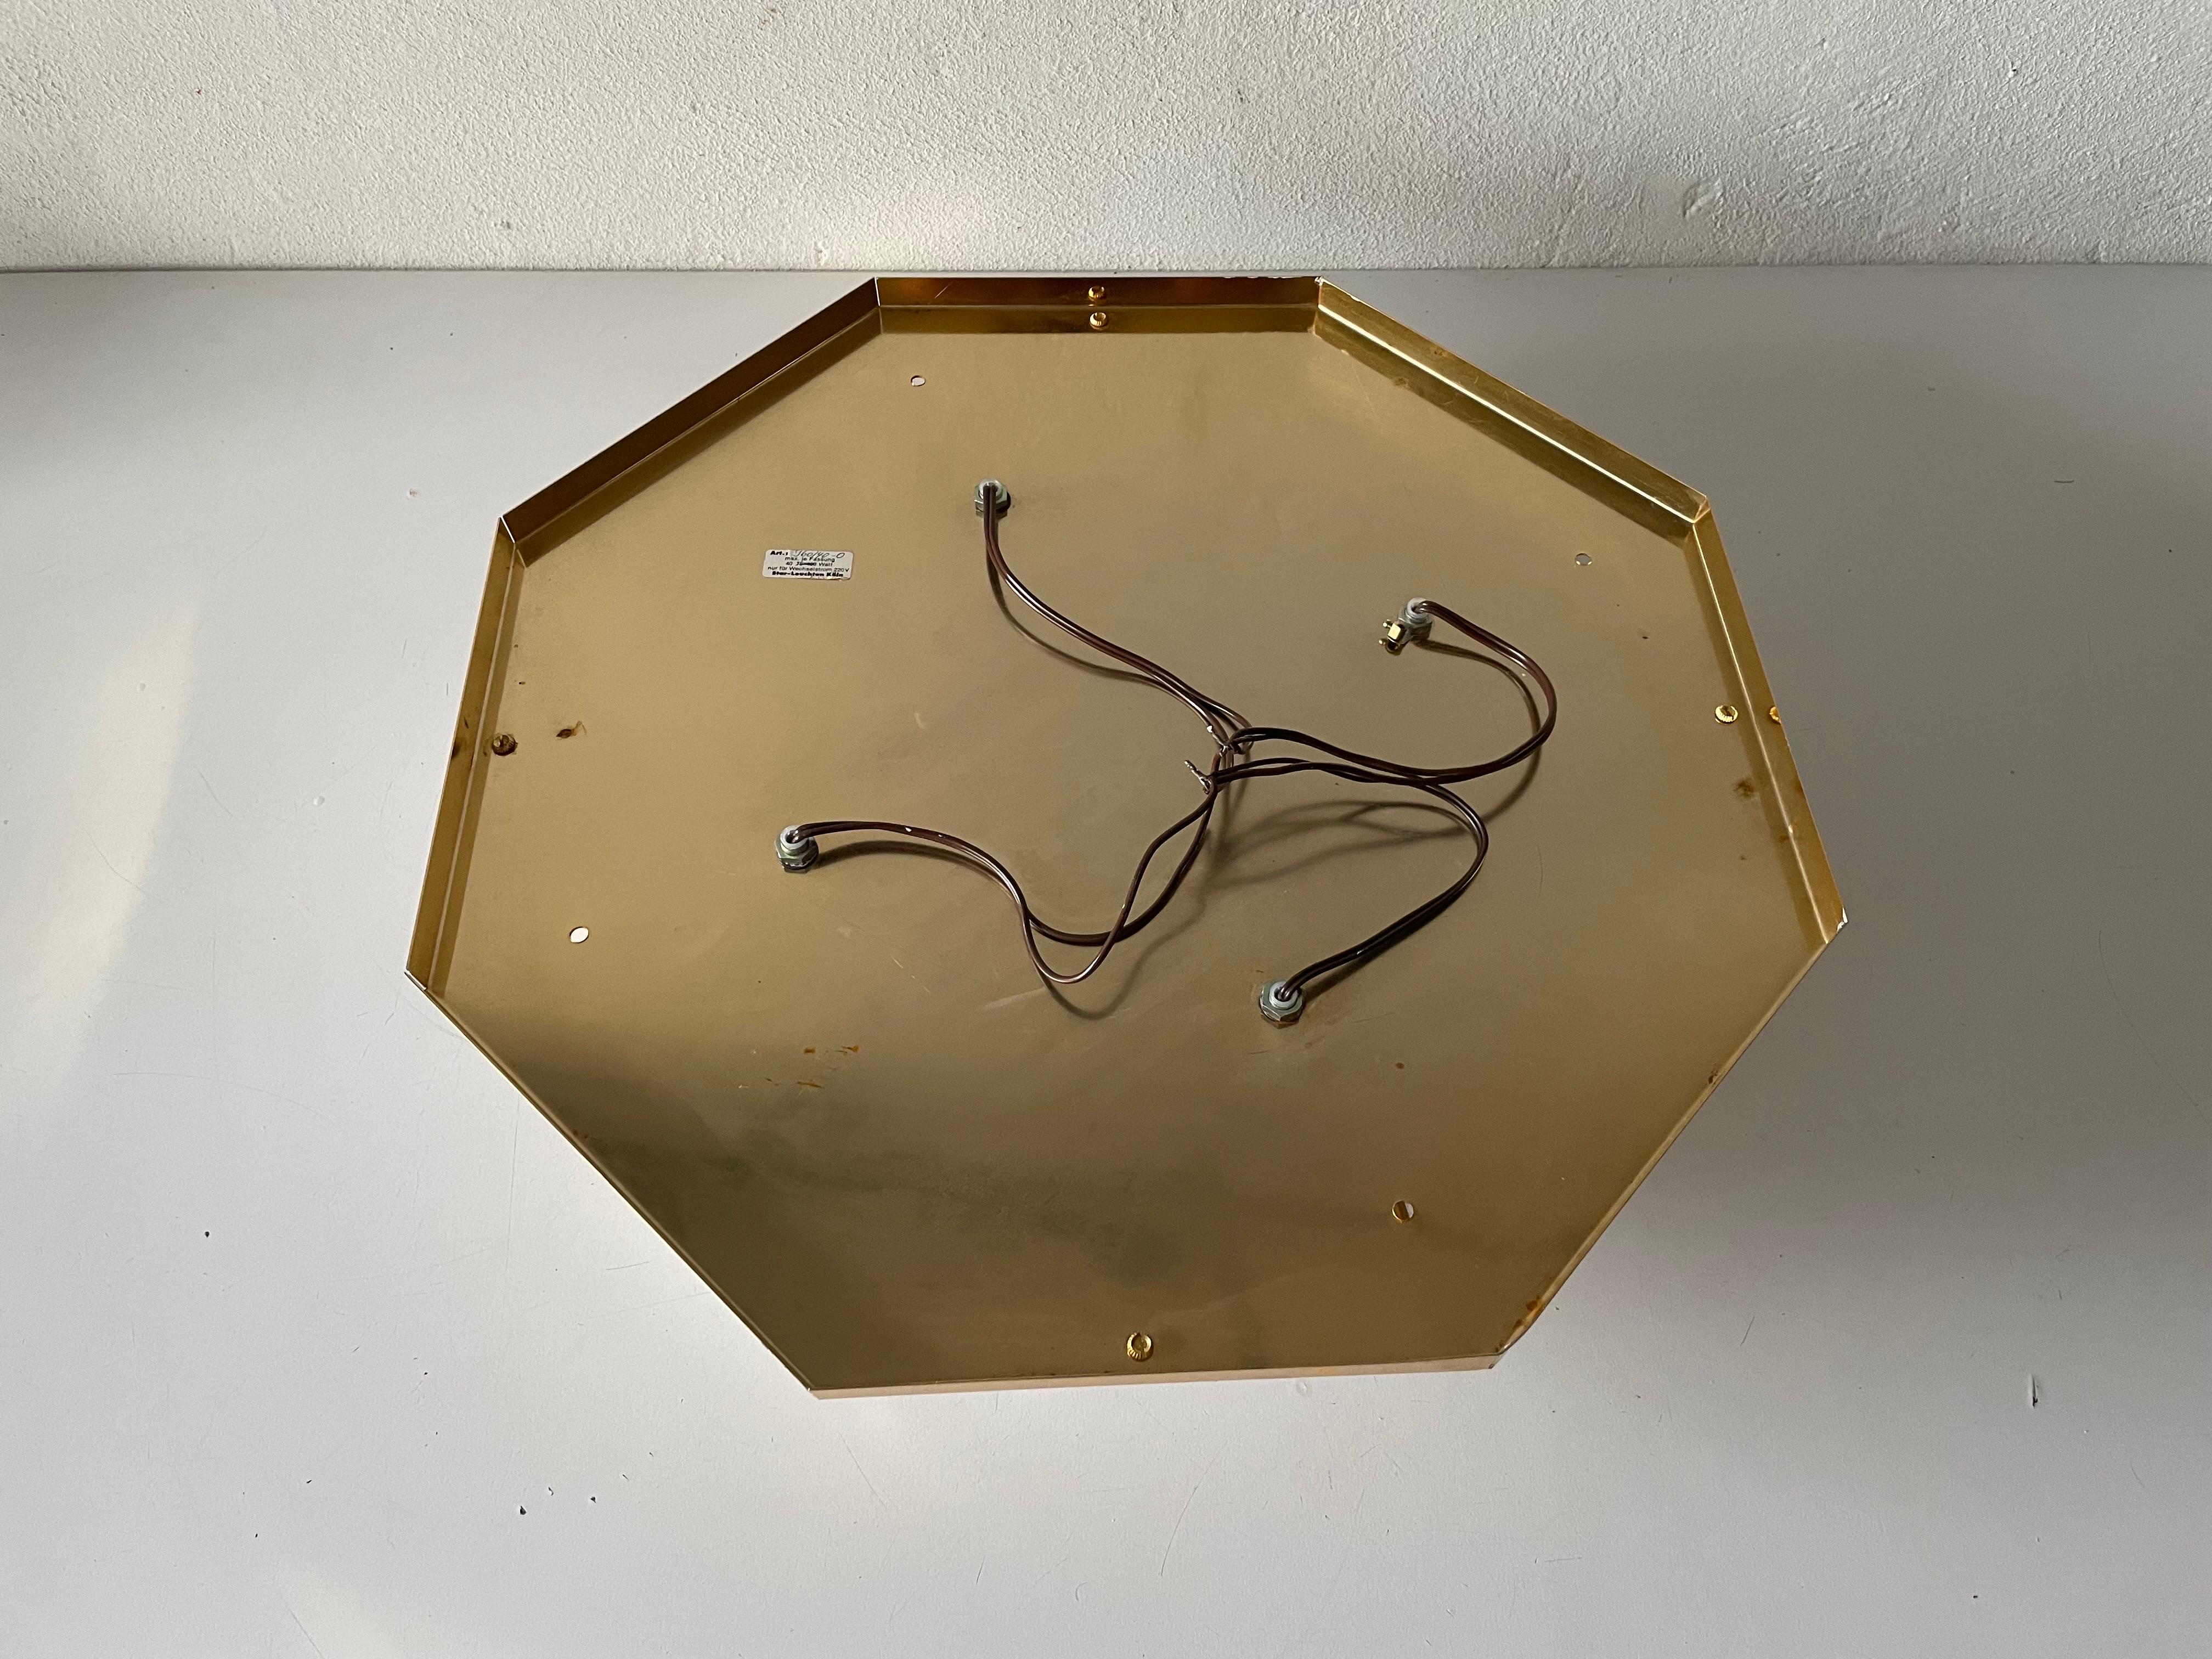 Octagonal White Glass Gold Metal Ceiling Lamp by Star Leuchten, 1980s, Germany For Sale 10